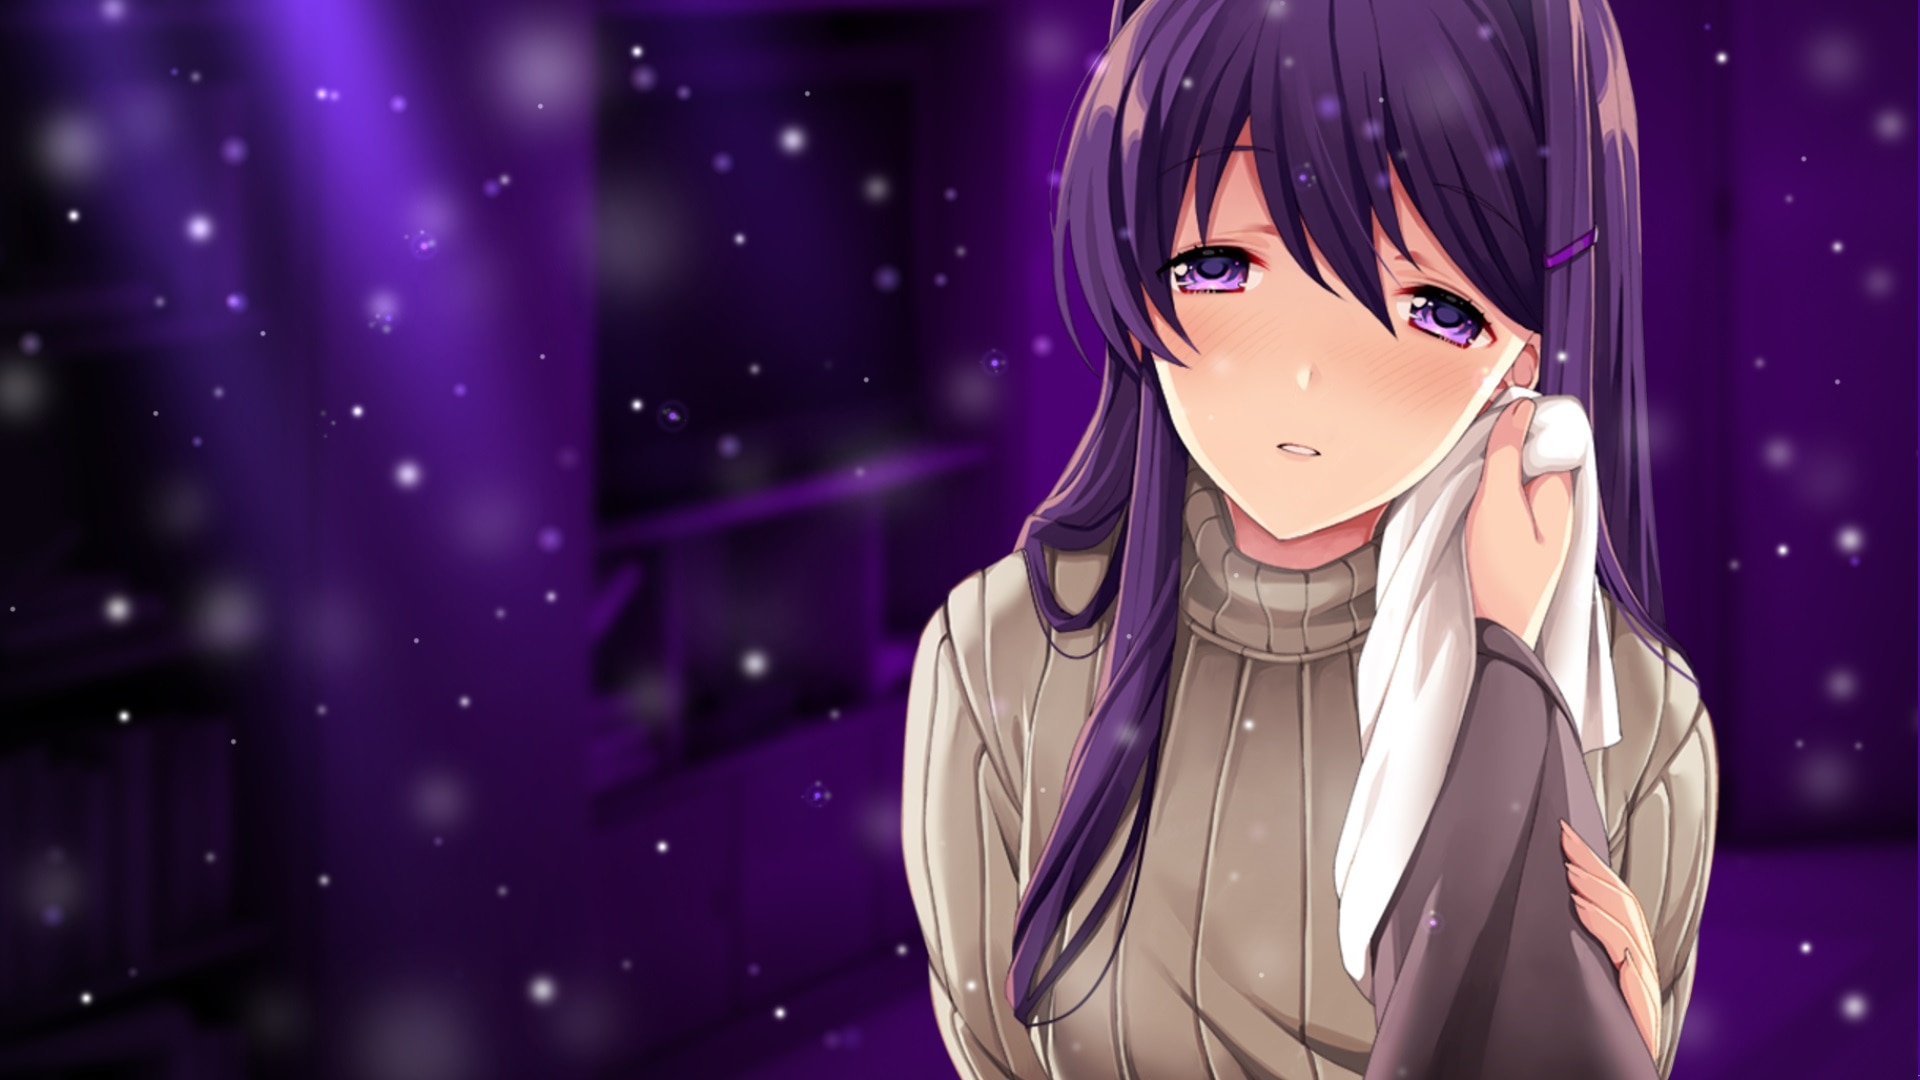 1920x1080 Doki Doki Literature Club! Wallpaper Background Image. View,  download, comment, and rate - Wallpaper Abyss